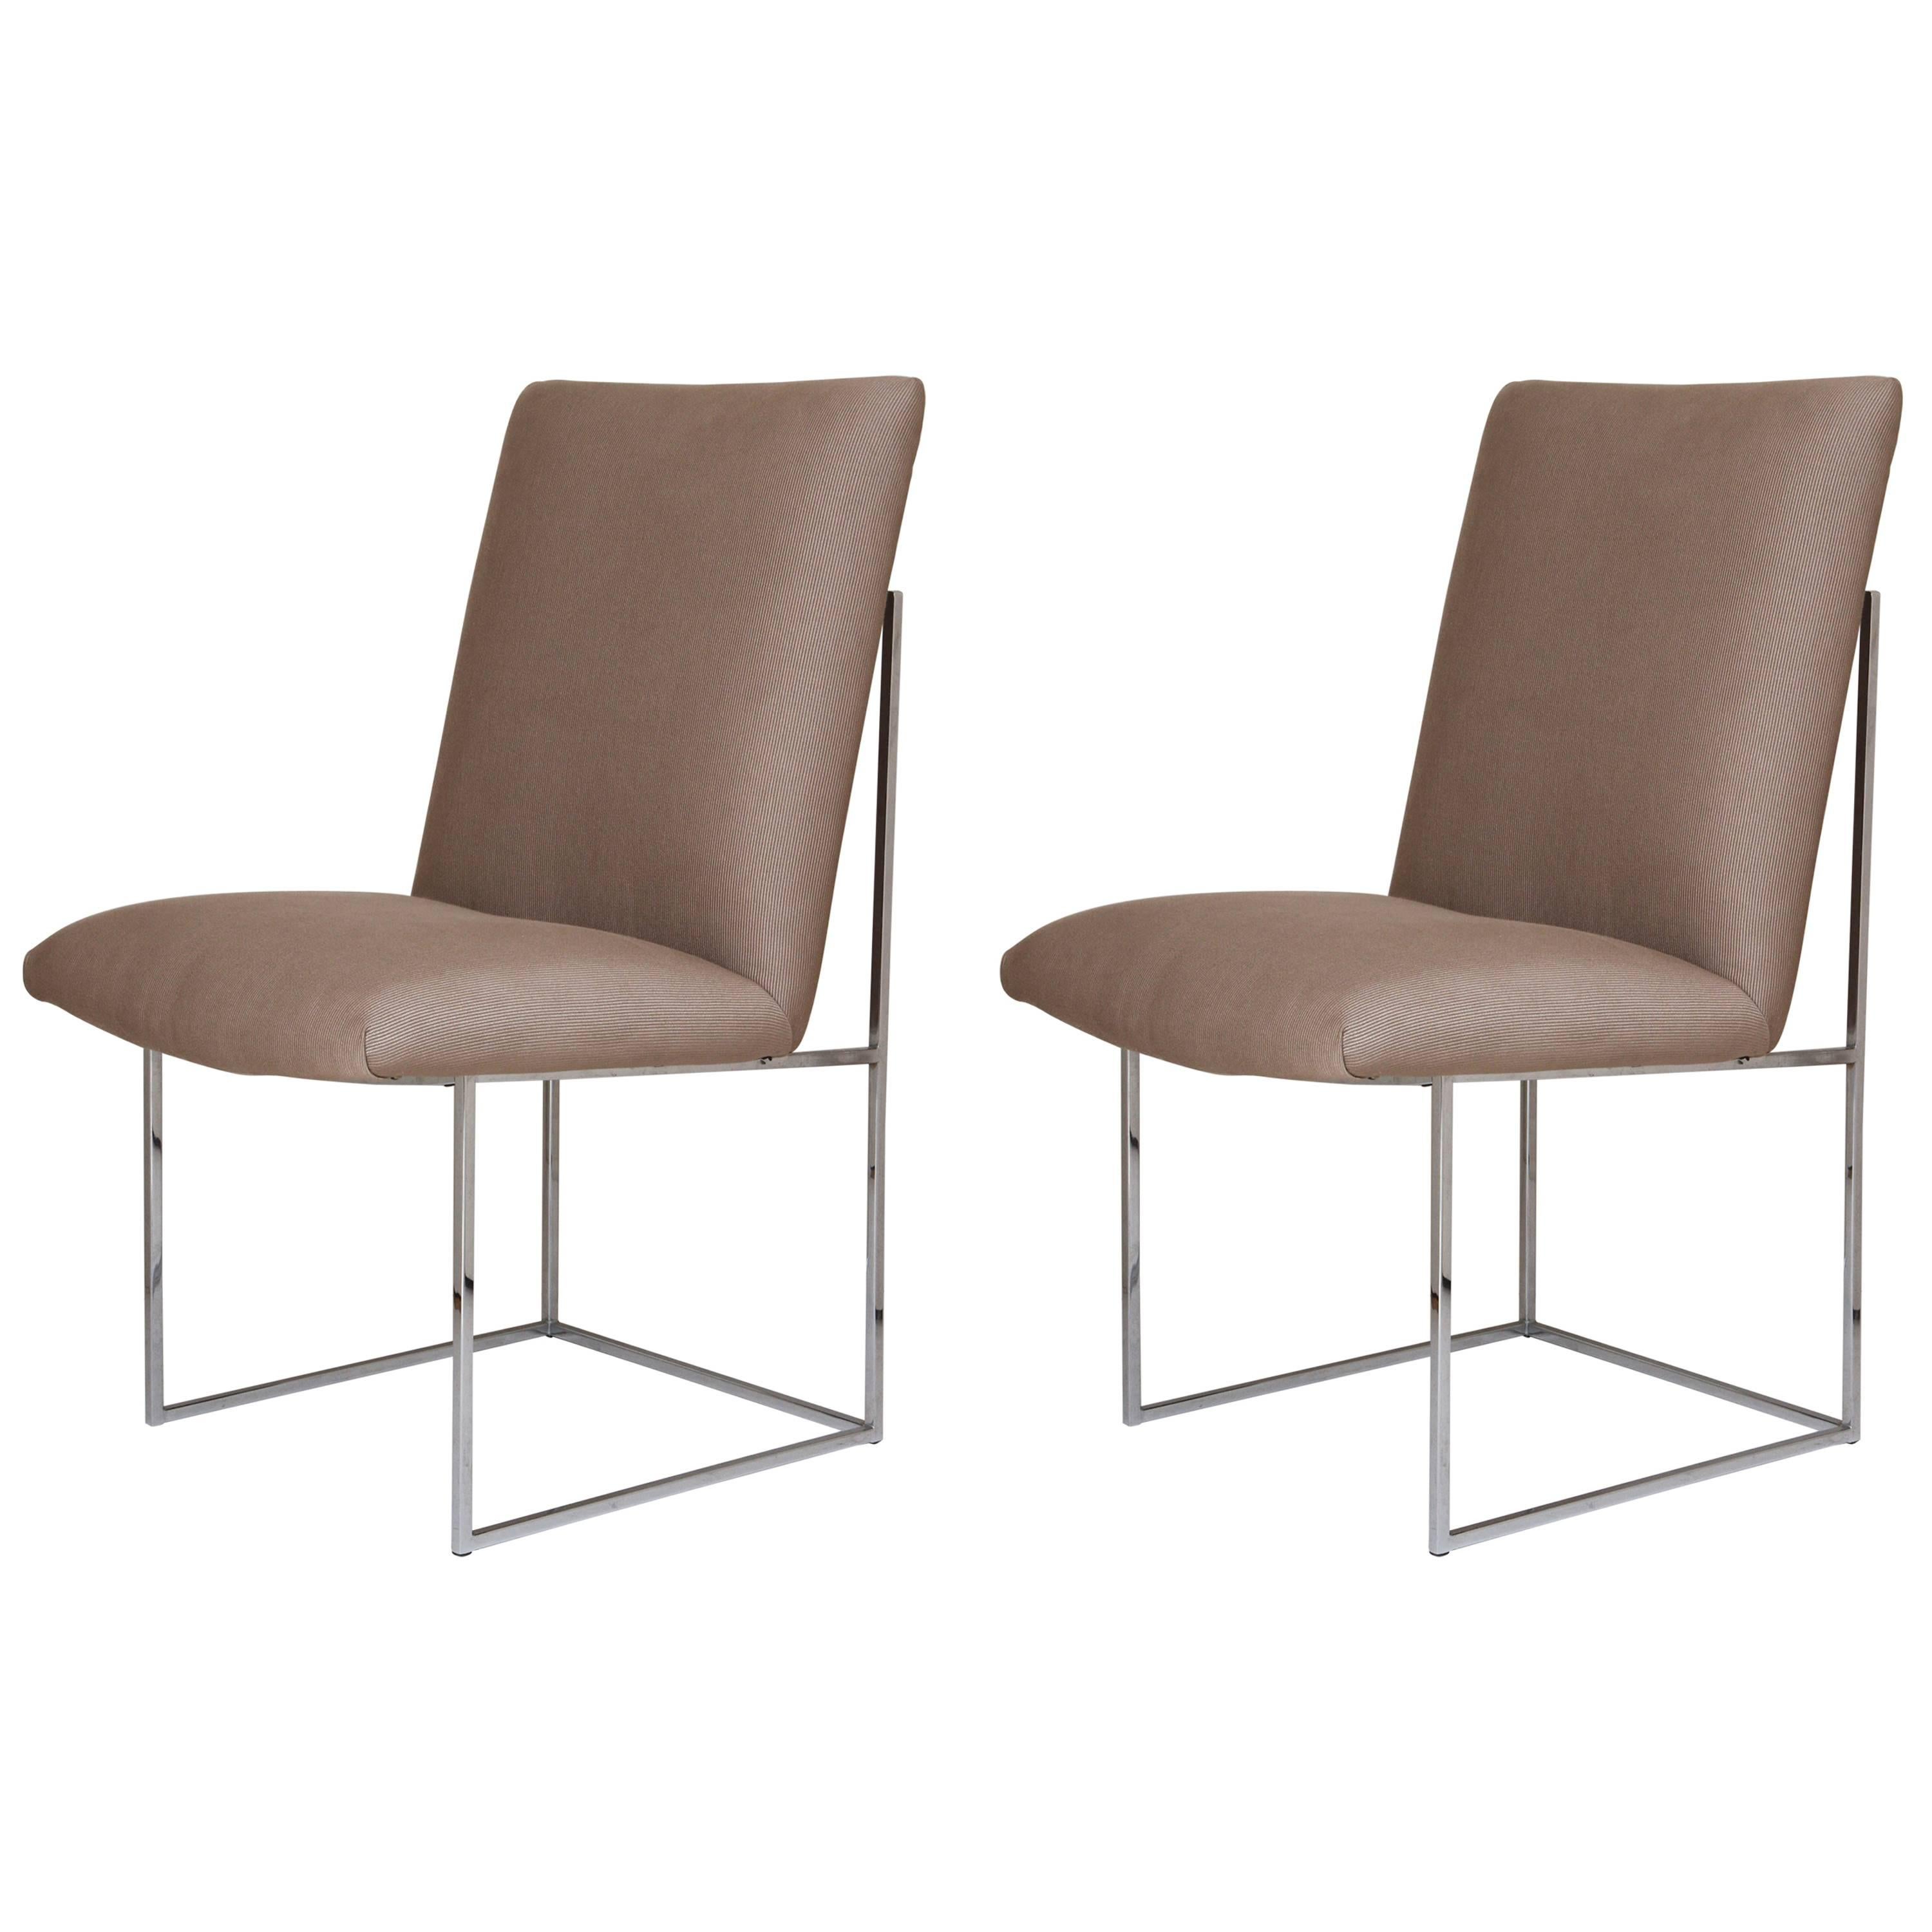 Pair of Milo Baughman Chairs For Sale